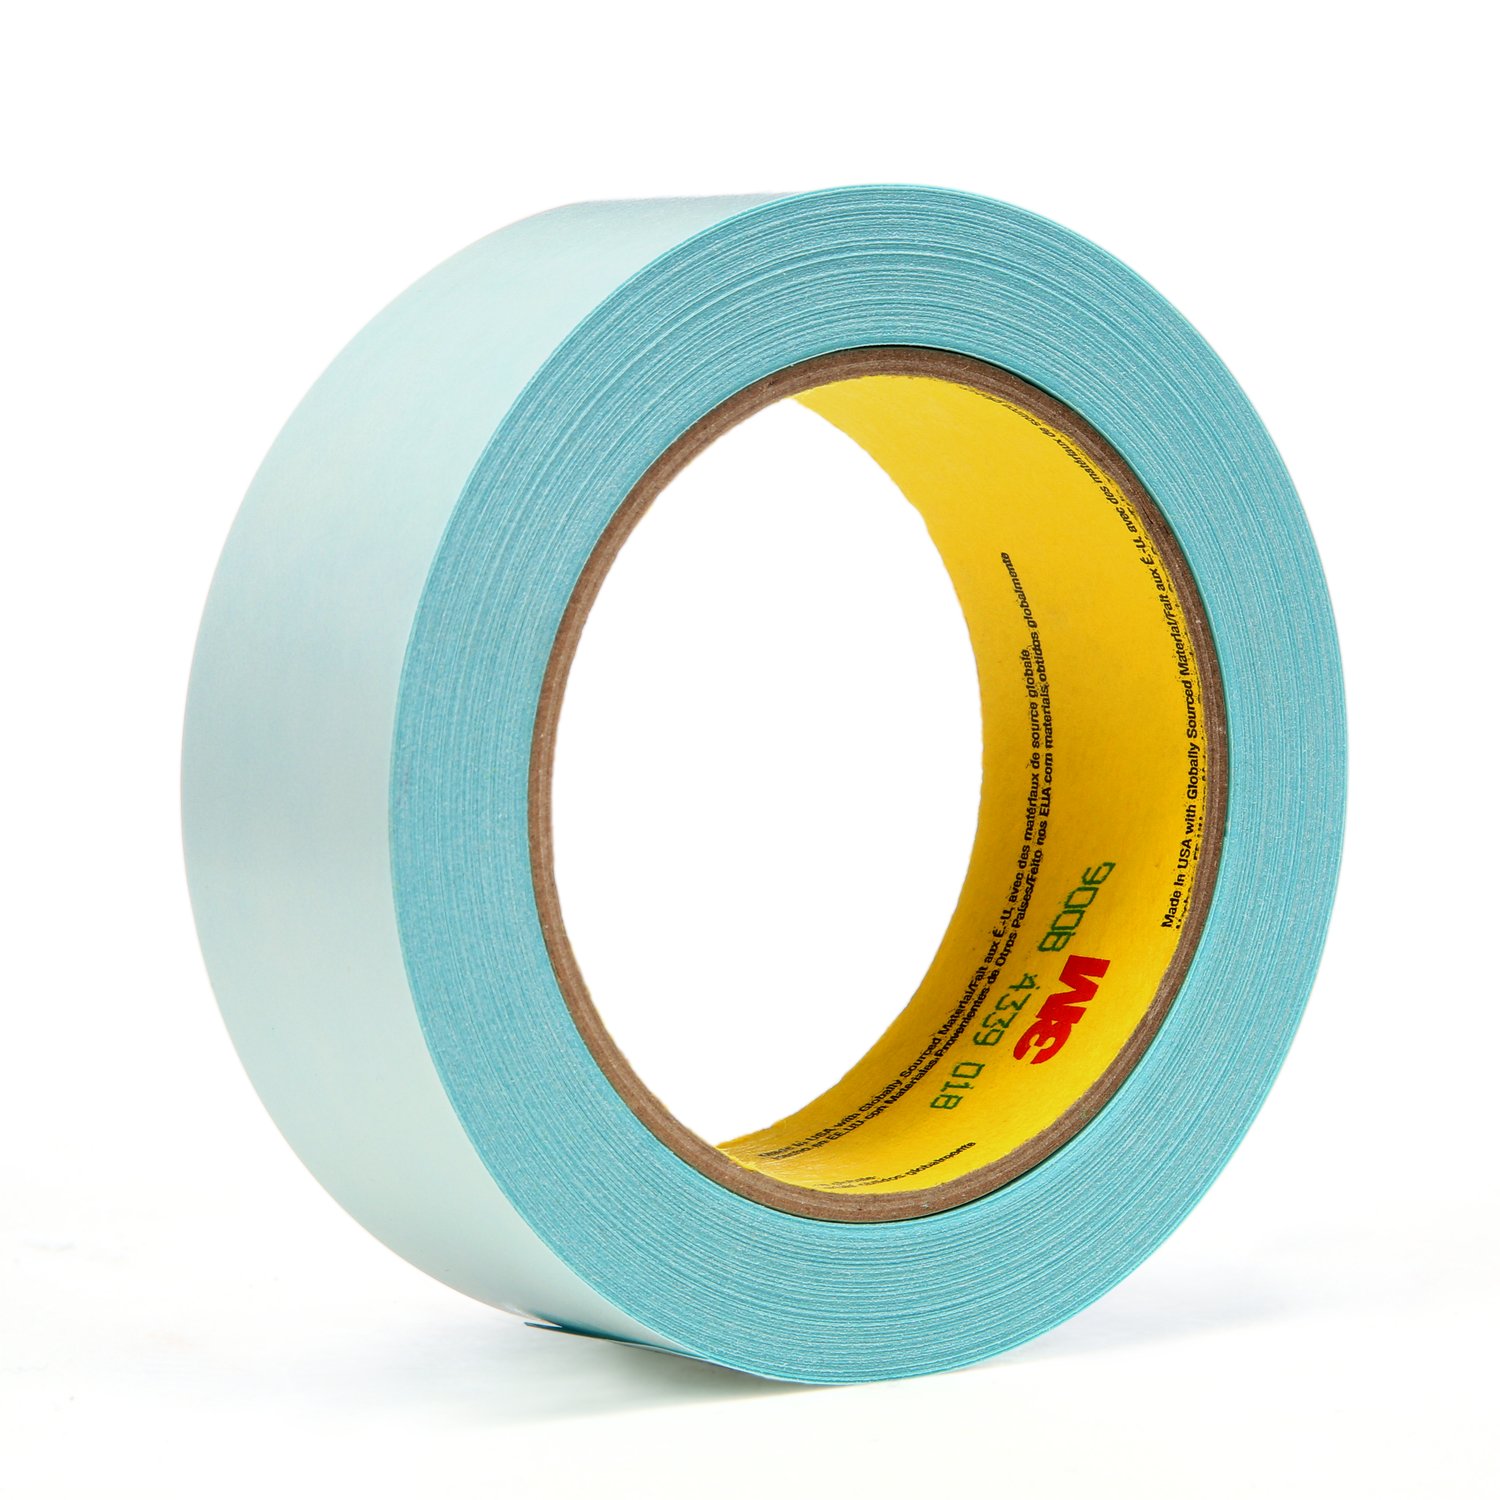 7100027945 - 3M Repulpable Double Coated Splicing Tape 900, 24 mm x 33 m, 2.5 mil,
36 Roll/Case